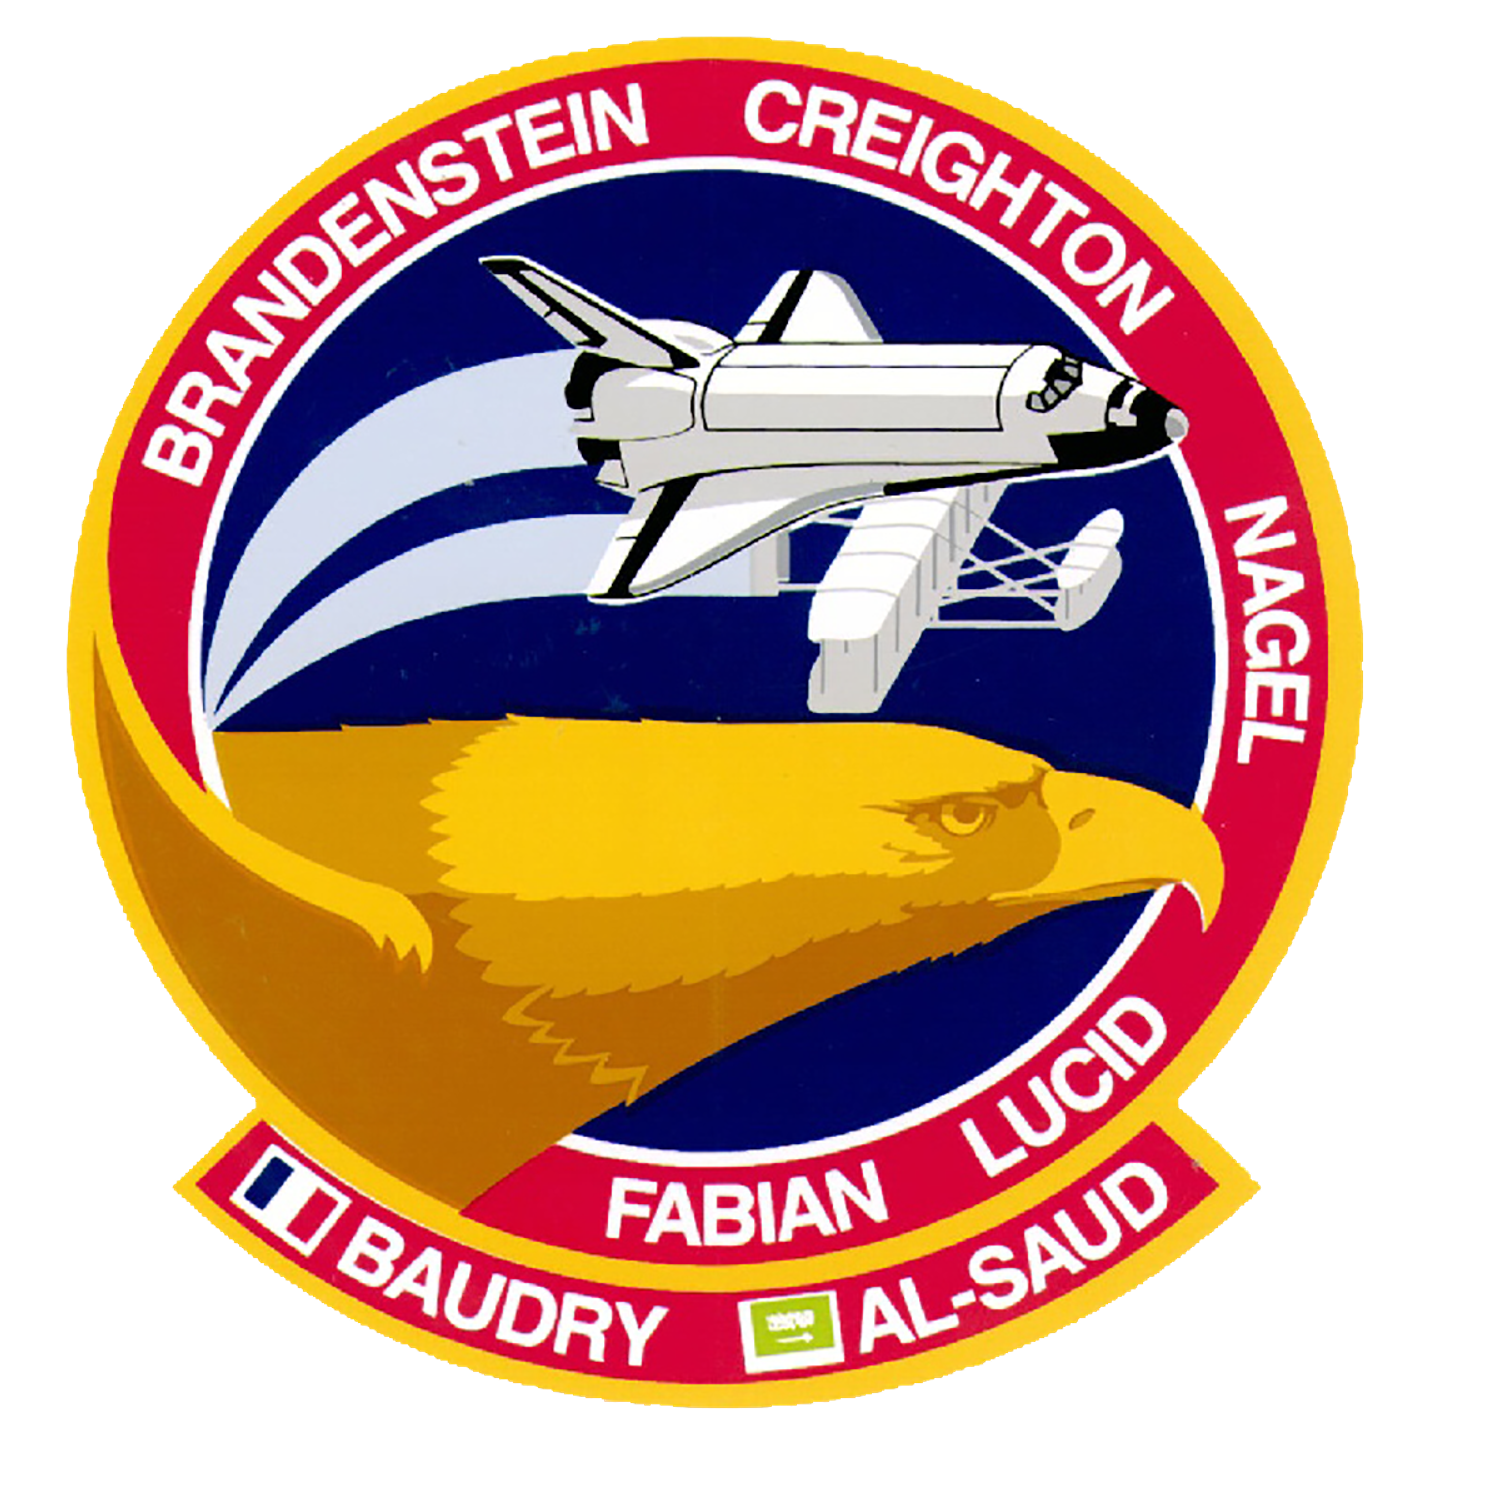 STS-51-G (Discovery)